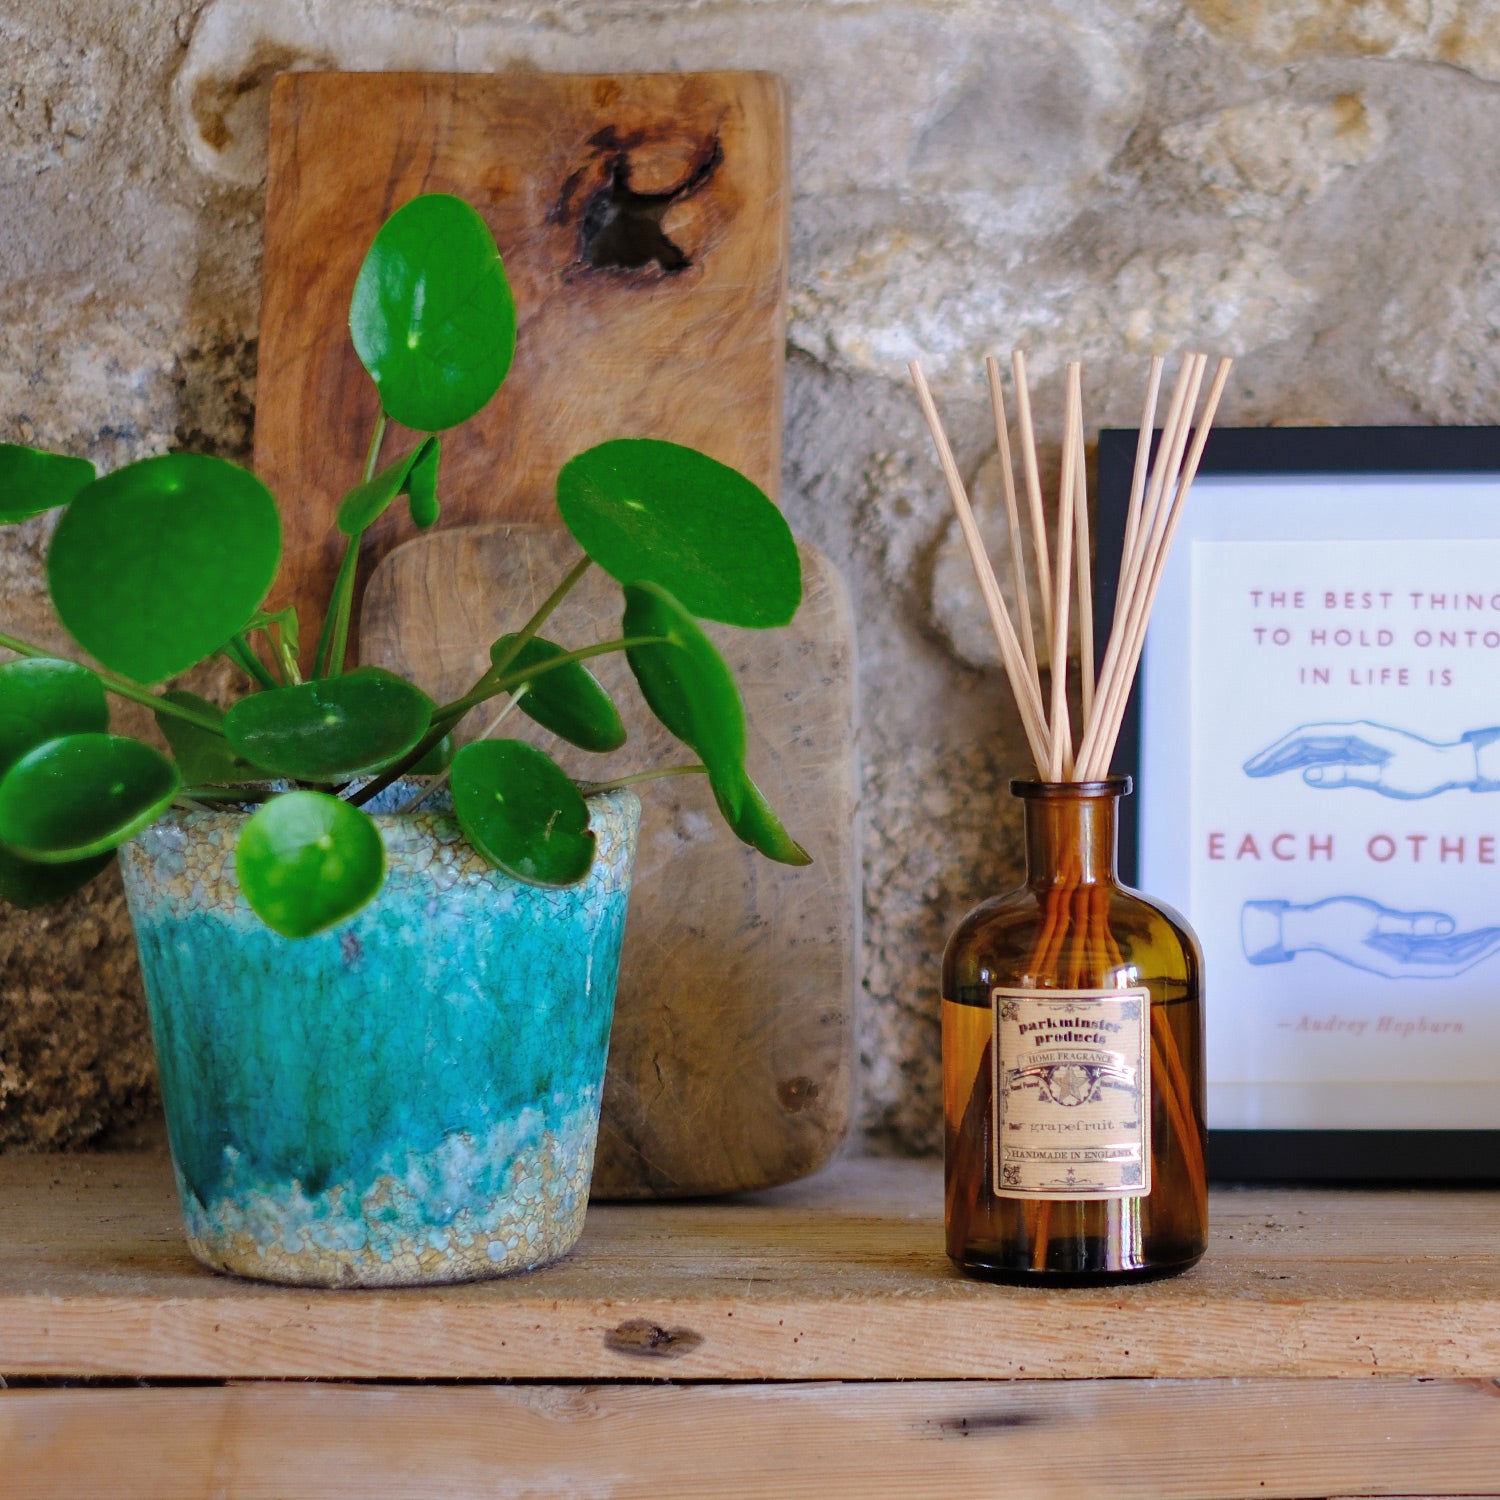 200ml Grapefruit Reed Diffuser by Parkminster Home Fragrance, made with 100% essential oil, from the Apothecary Collection, handcrafted in Cornwall